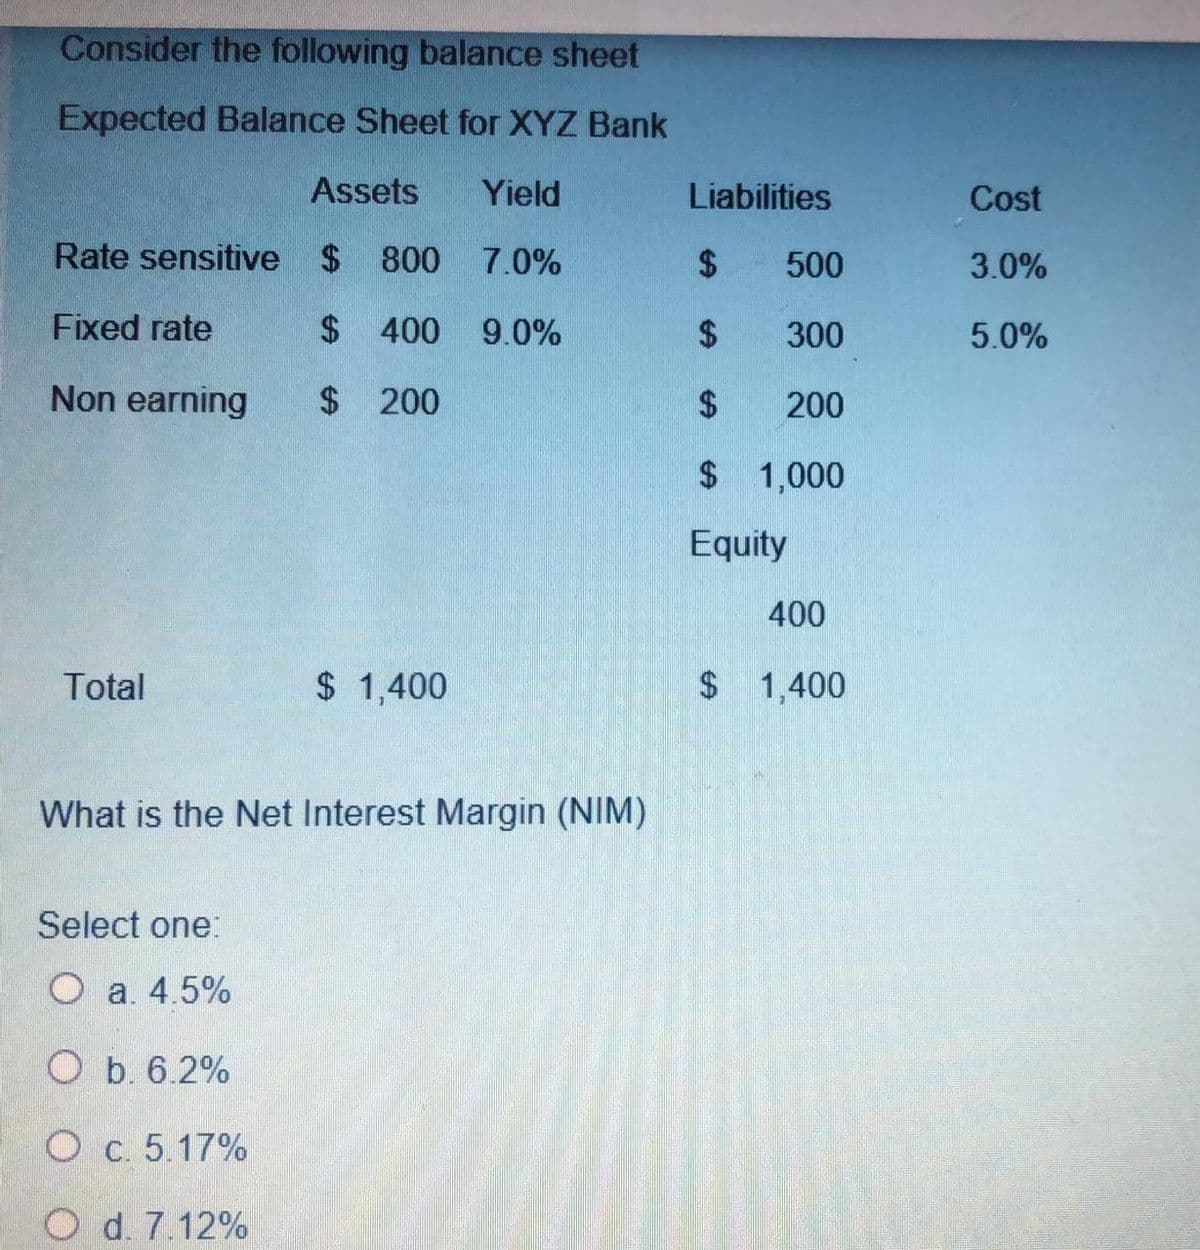 Consider the following balance sheet
Expected Balance Sheet for XYZ Bank
Assets
Yield
Liabilities
Cost
Rate sensitive $ 800 7.0%
500
3.0%
Fixed rate
$ 400 9.0%
300
5.0%
Non earning
$ 200
200
$ 1,000
Equity
400
Total
$ 1,400
$ 1,400
What is the Net Interest Margin (NIM)
Select one:
O a. 4.5%
O b. 6.2%
O c. 5.17%
O d. 7.12%
%24
%24
%24
